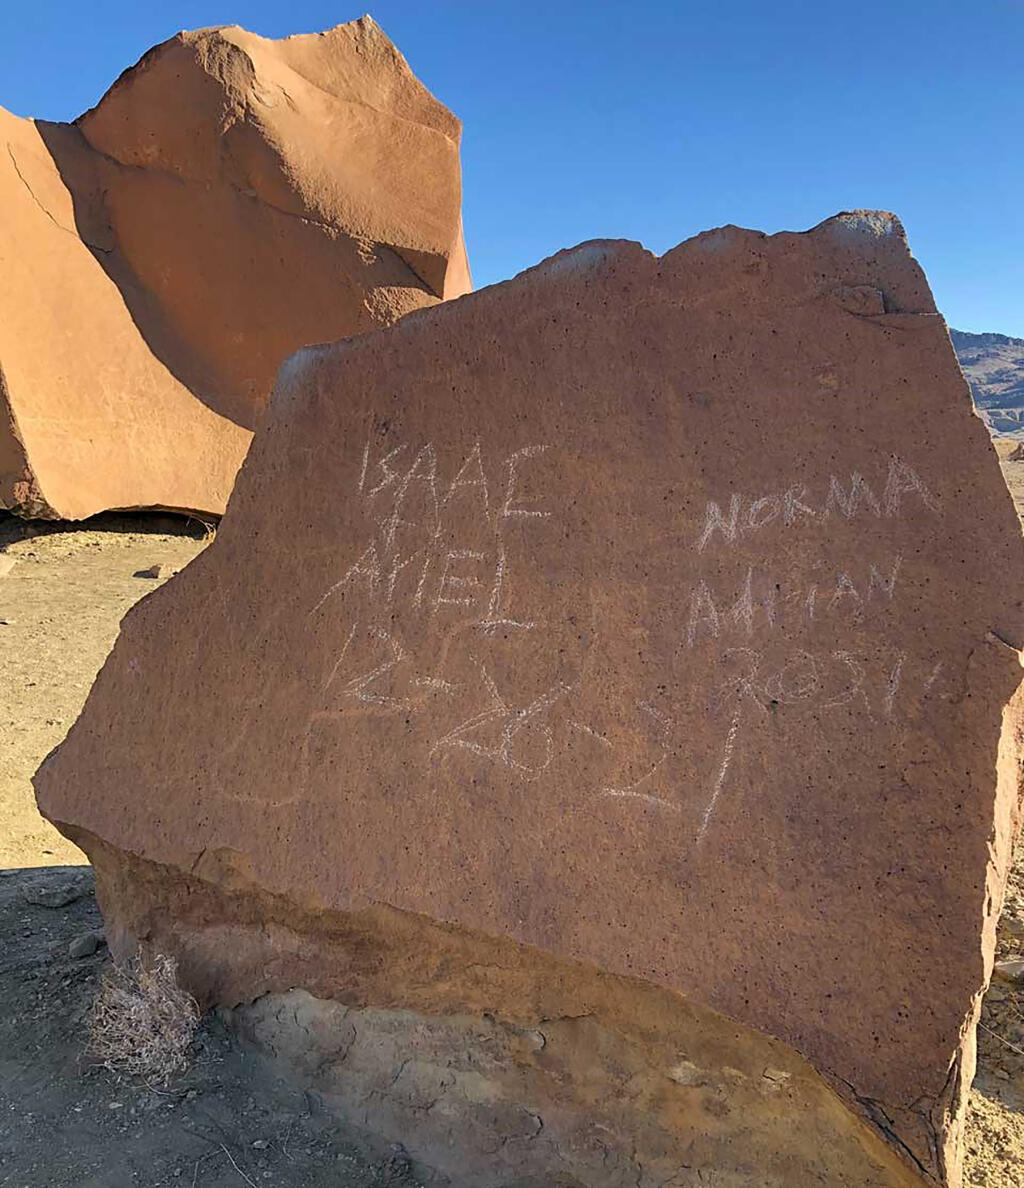 In an undated image provided by the National Park Service, vandalism on a rock at Big Bend National Park in Texas. Abstract geometric designs at Big Bend National Park in Texas that had survived for thousands of years were “irreparably damaged” by vandals who scratched names and dates into the prehistoric designs, the National Park Service said. (National Park Service via The New York Times)